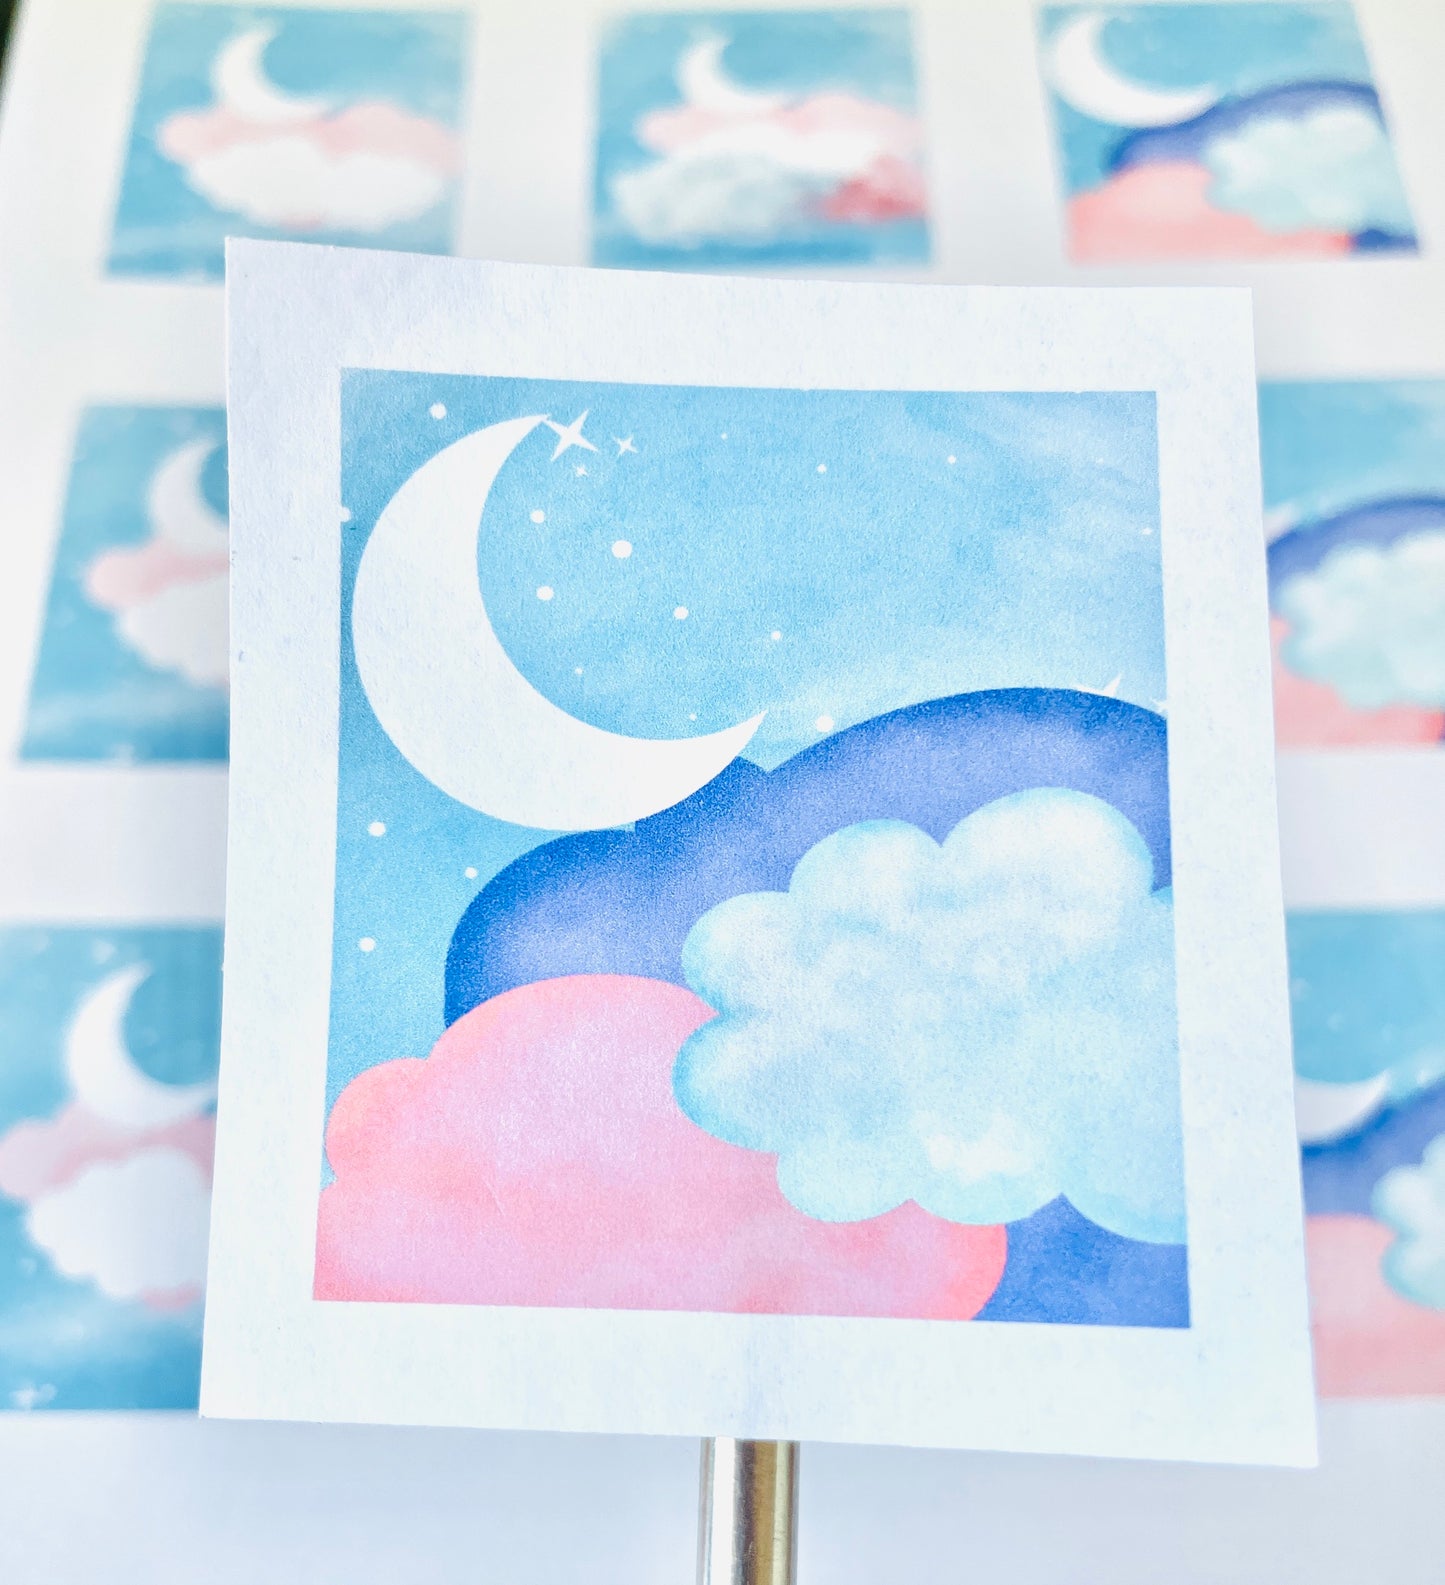 Moon & Stars stickers, Cloud Labels, Journaling Stickers, Envelope Seals, Wrapping Labels.  PK 9